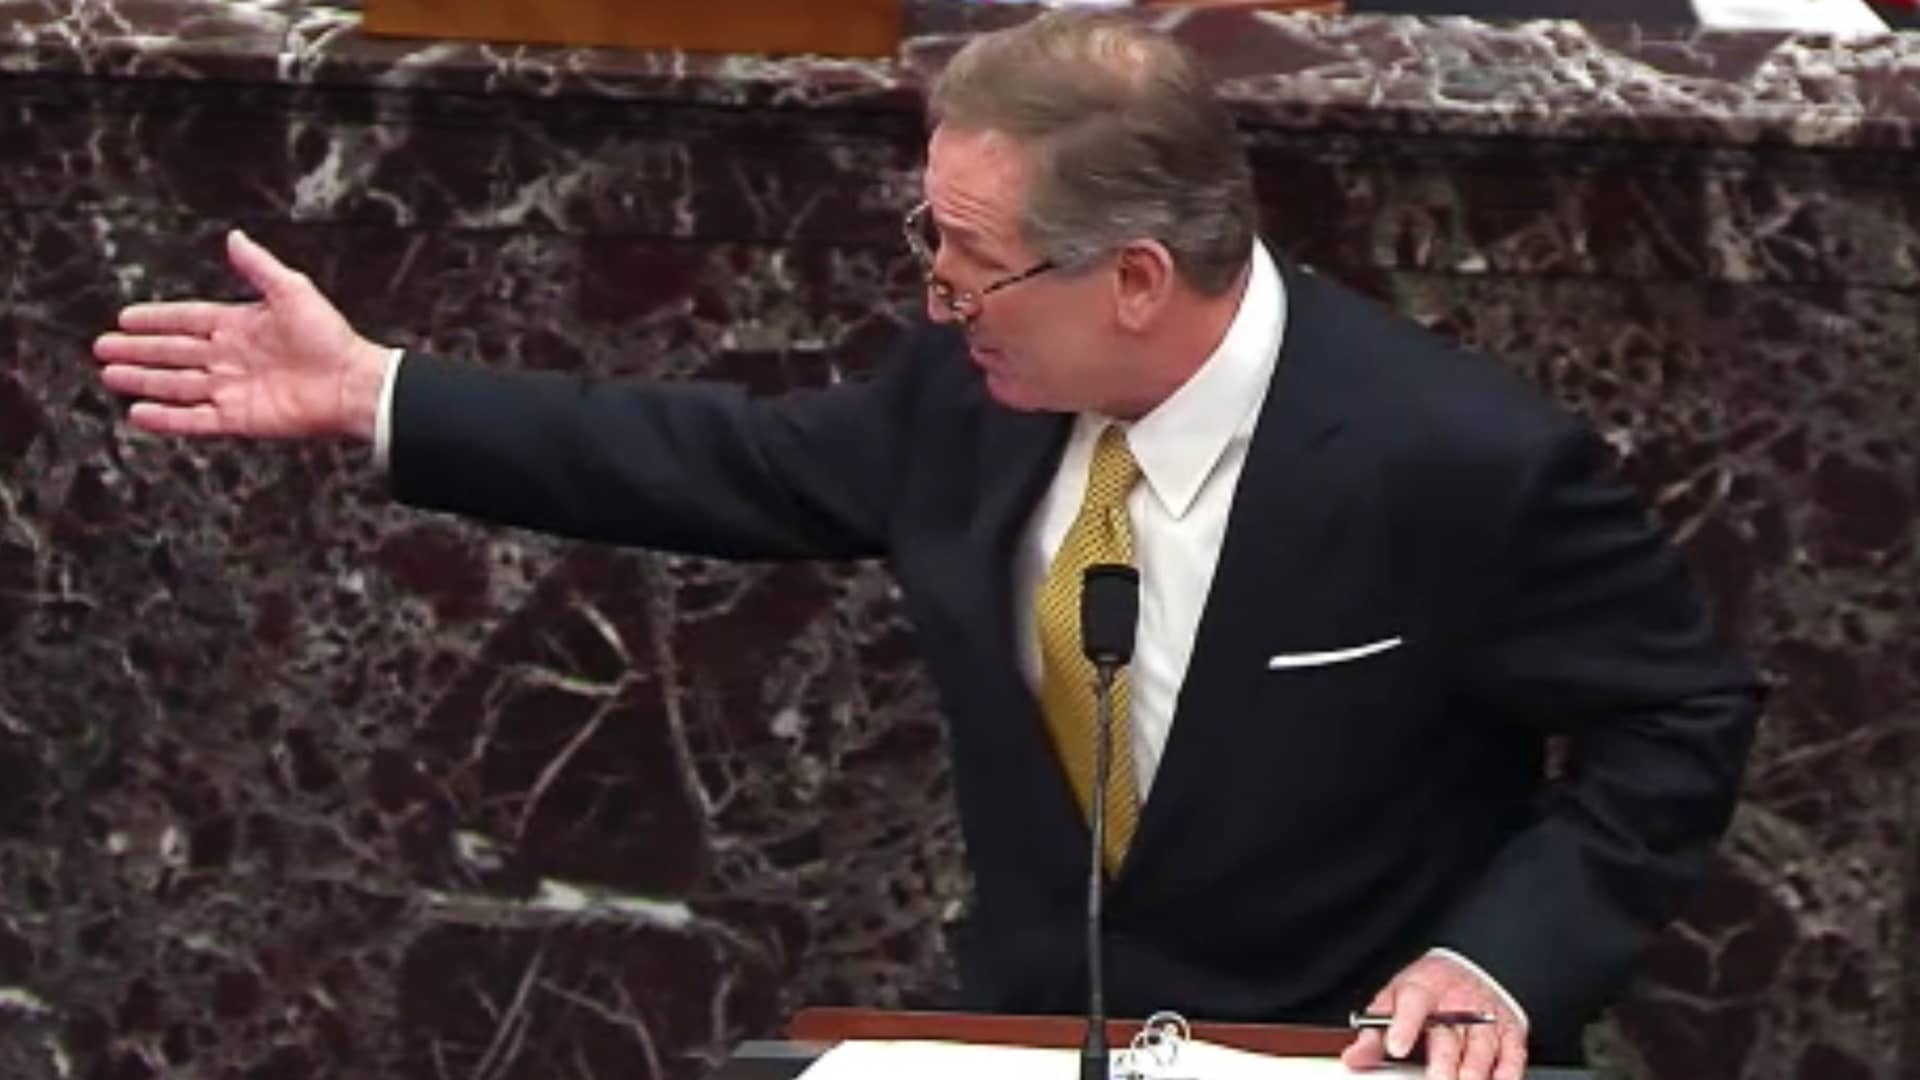 Michael van der Veen, defense attorney for Donald Trump, speaks in the Senate Chamber in a video screenshot in Washington, D.C., on Friday, Feb. 12, 2021.